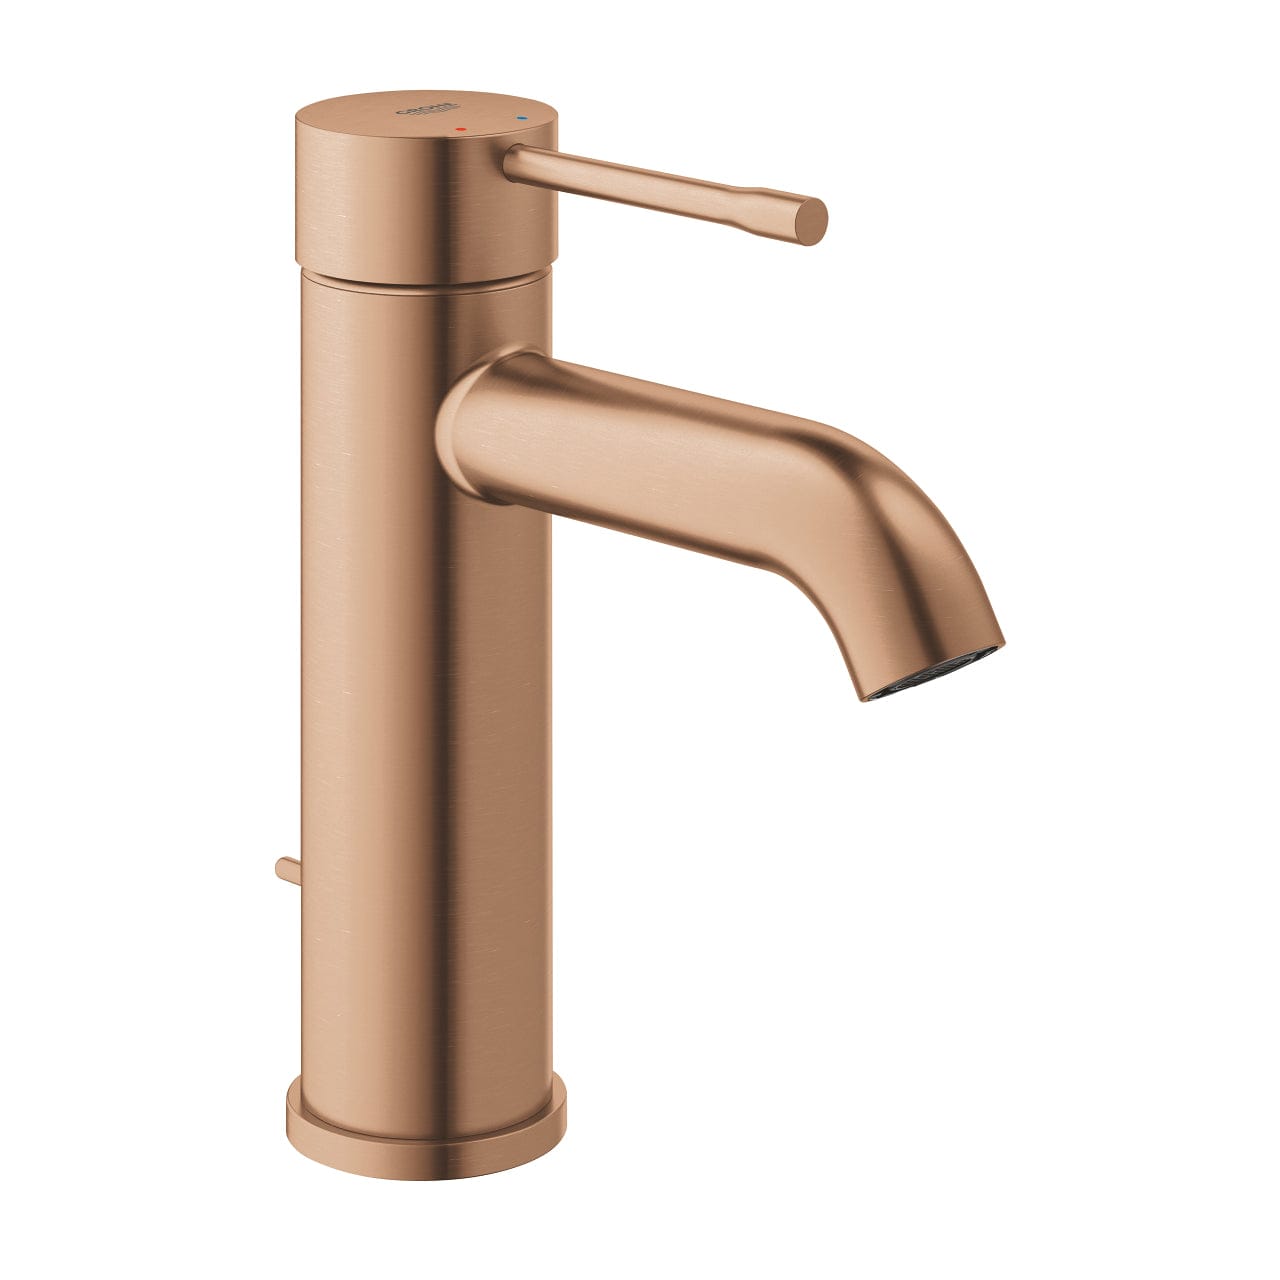 Grohe Essence Basin Mixer 1/2″ S-Size, Brushed Warm Sunset | Supply Master | Accra, Ghana Bathroom Faucet Buy Tools hardware Building materials